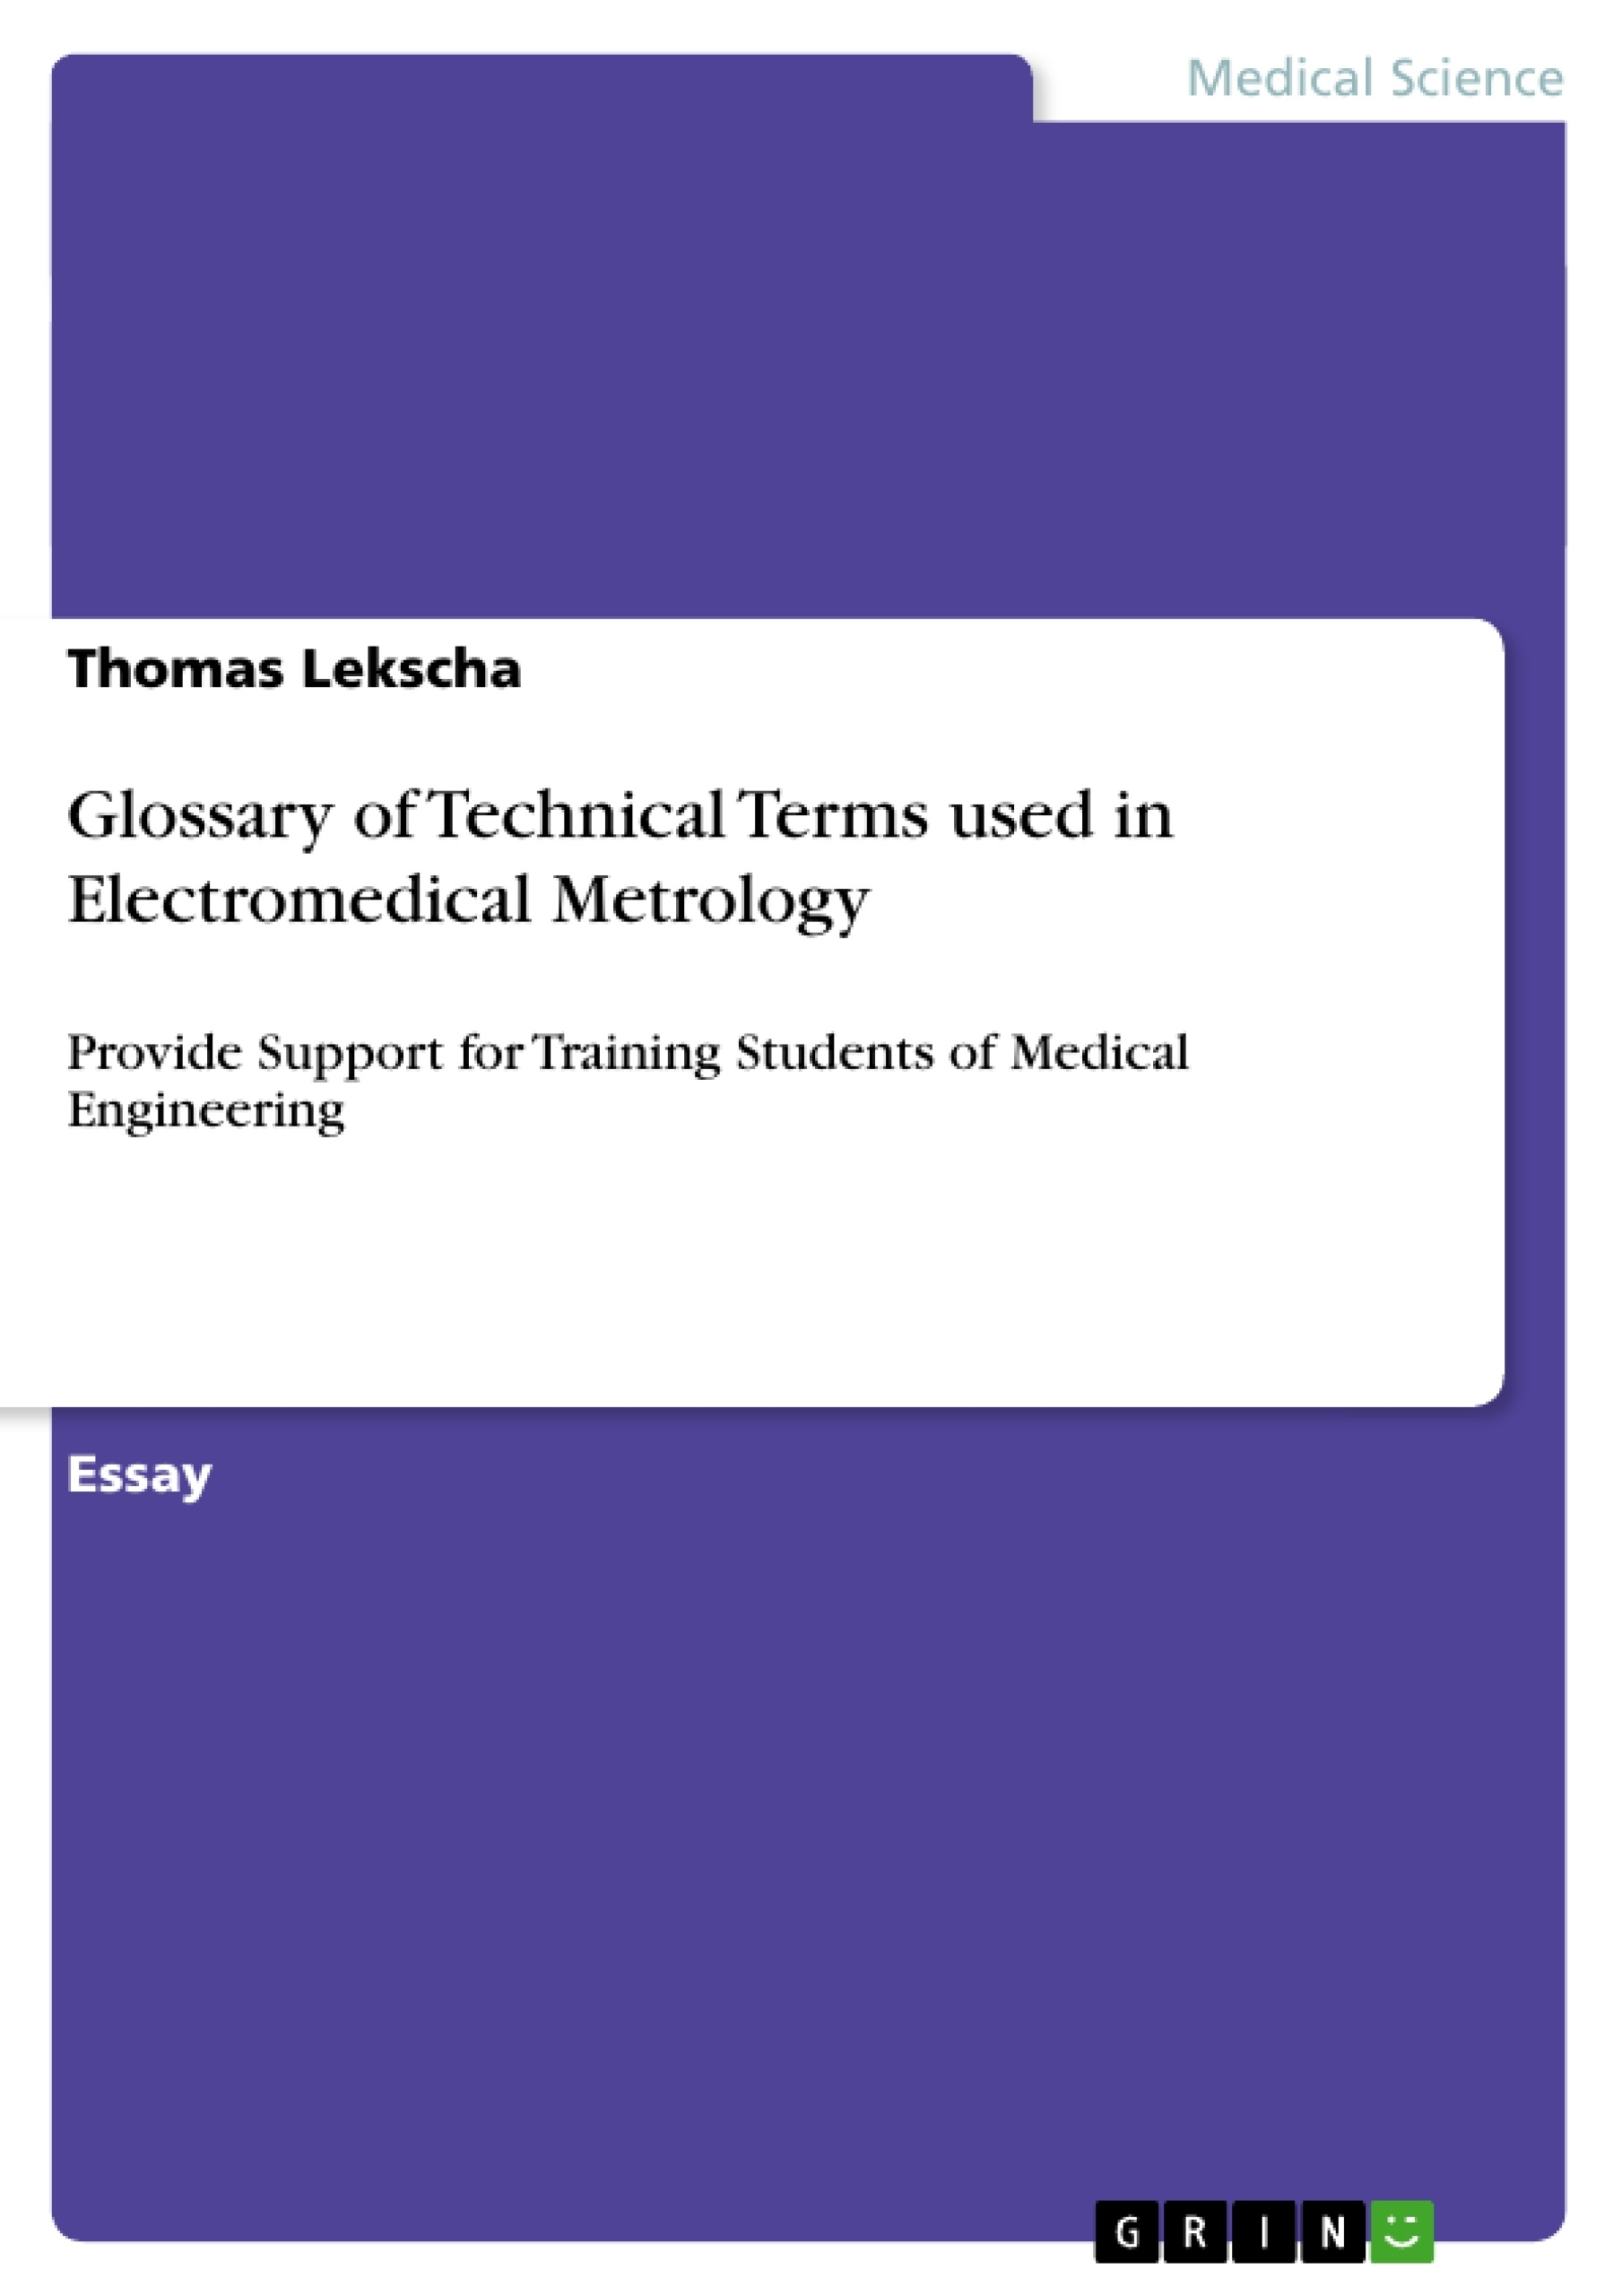 Título: Glossary of Technical Terms used in Electromedical Metrology